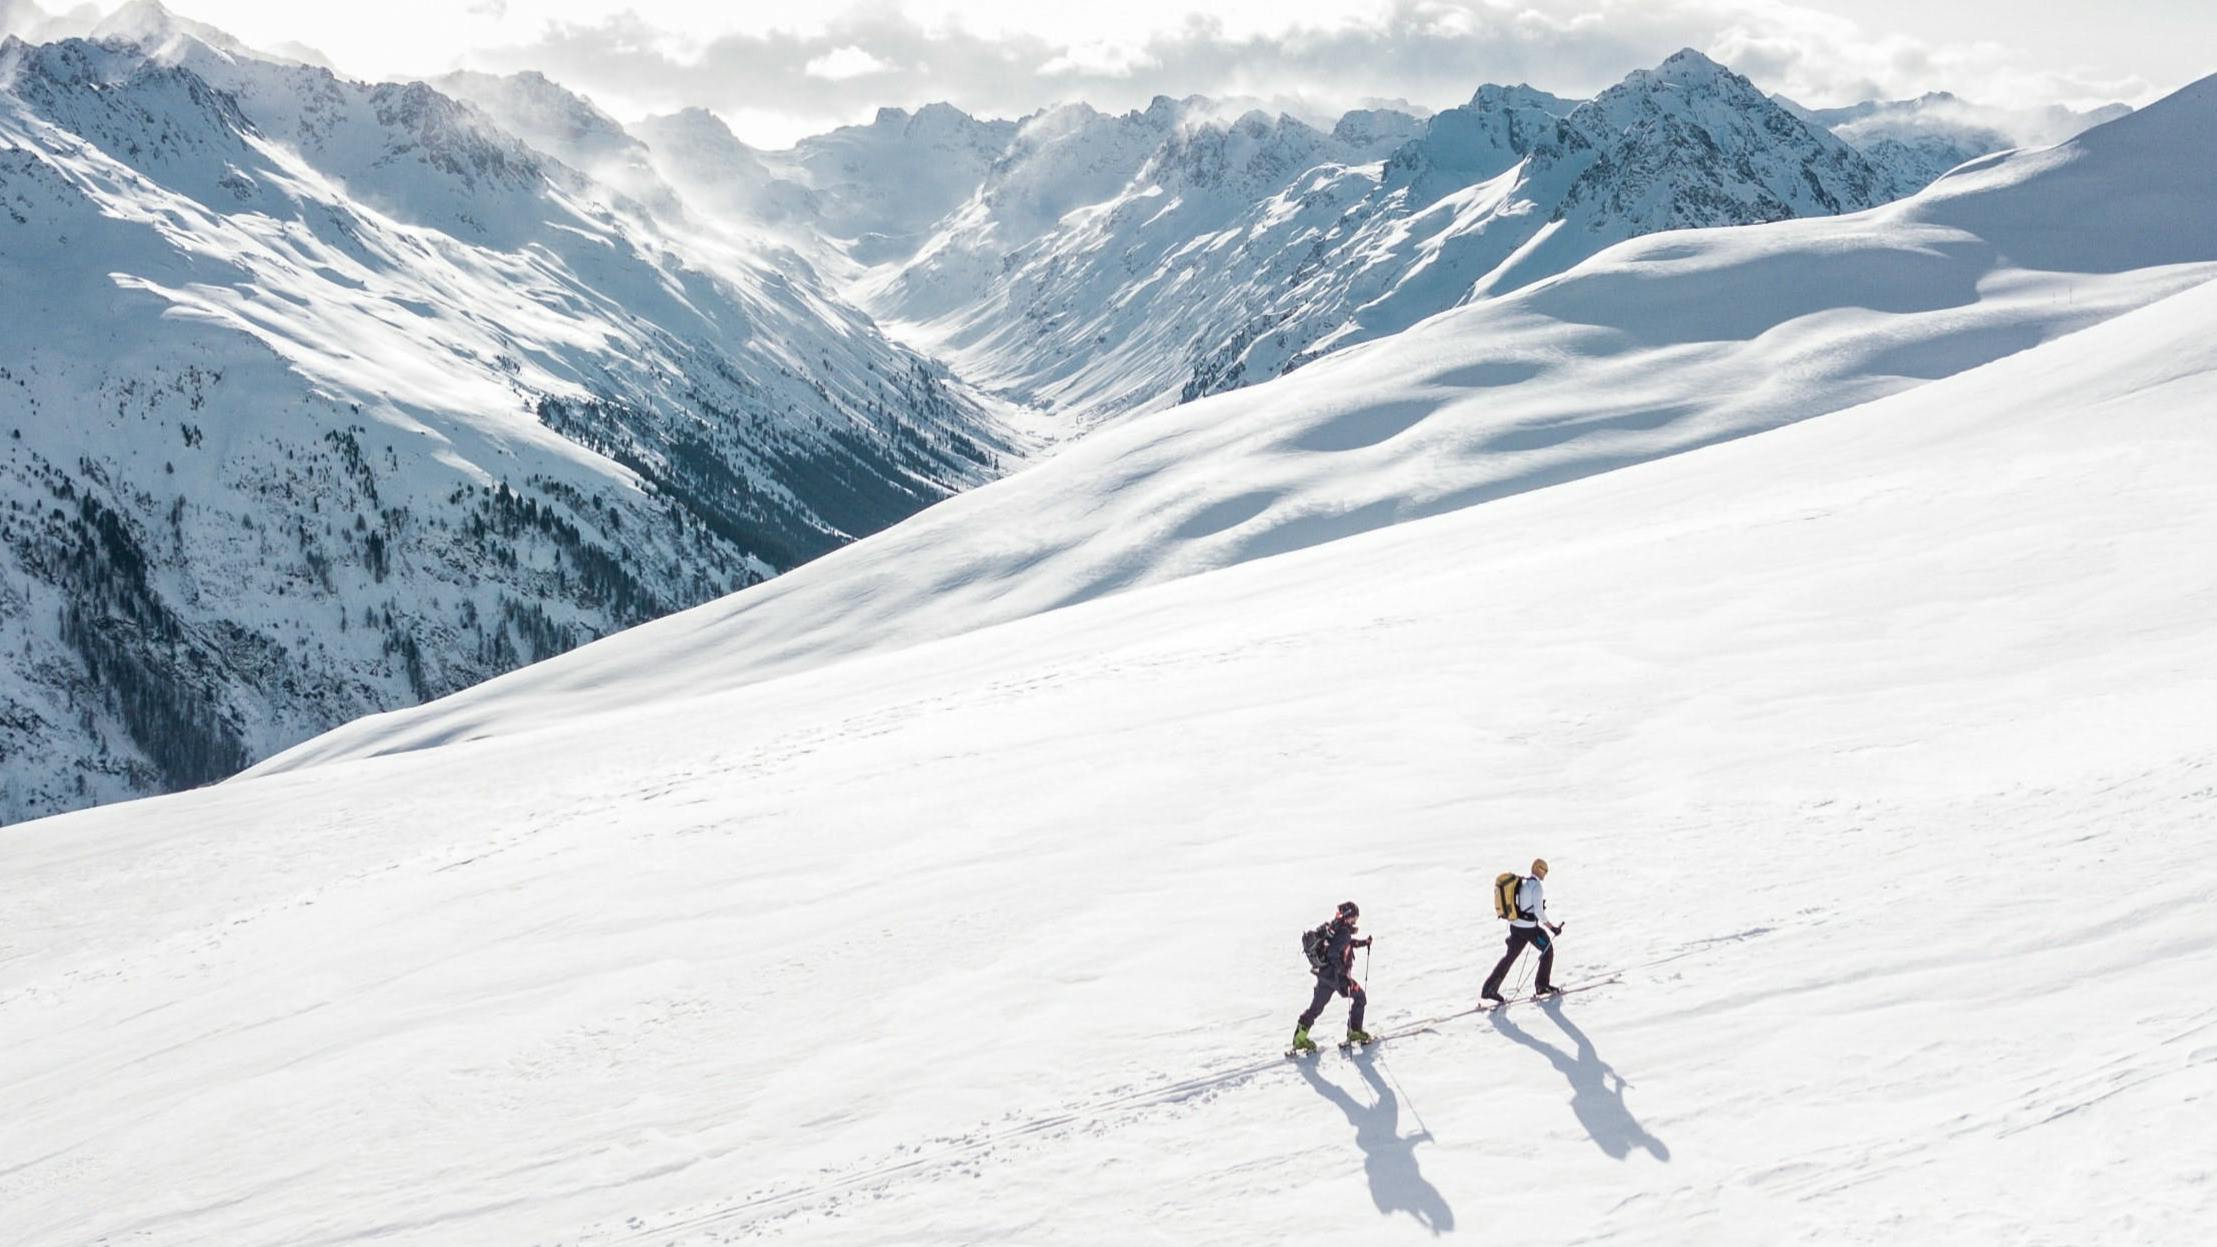 Two skiers walking up a very snowy hill on skis. There are many snowy mountains in the background.